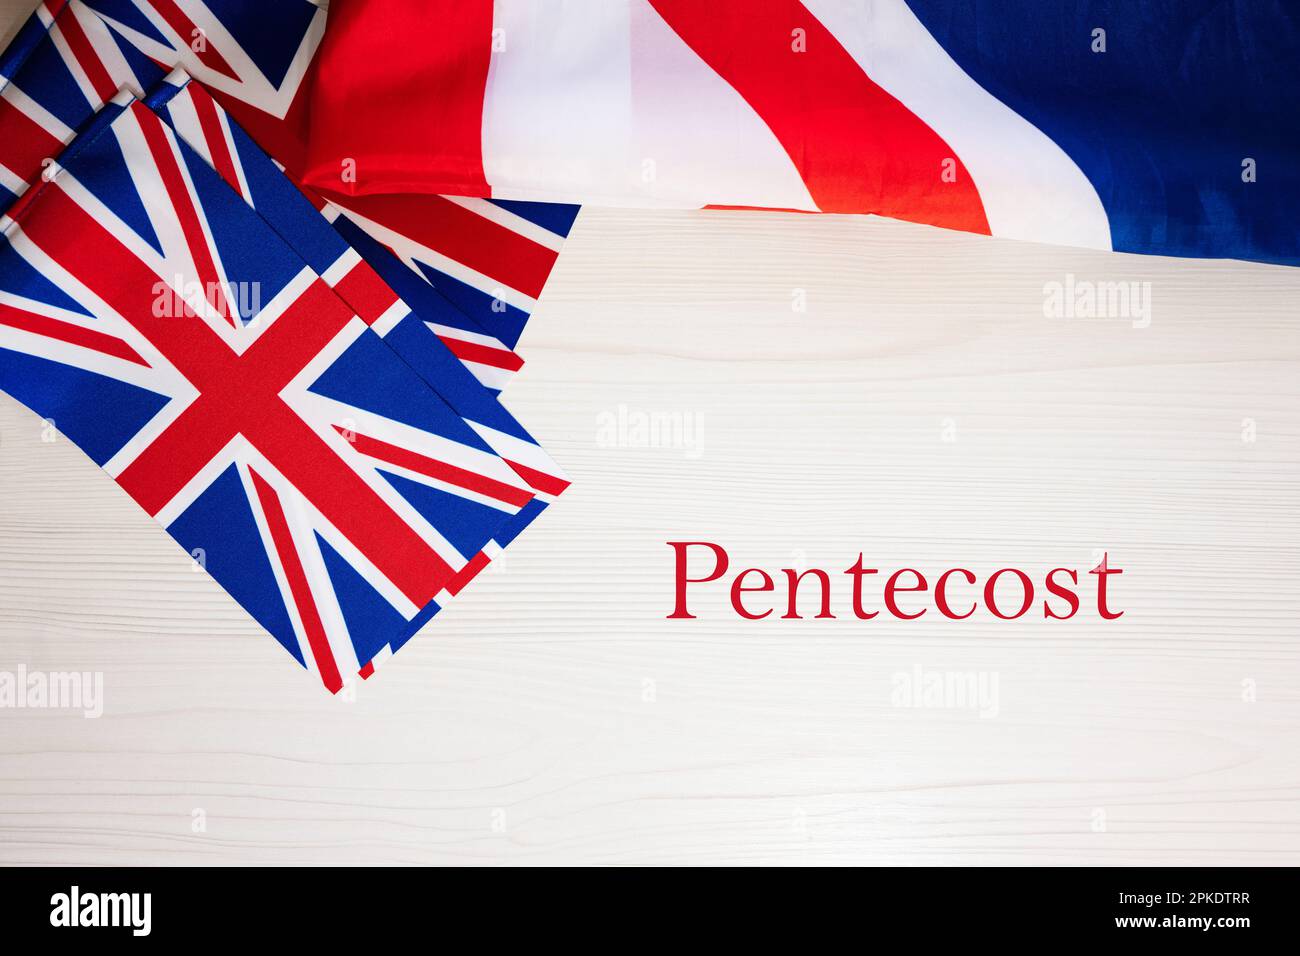 Pentecost. British holidays concept. Holiday in United Kingdom. Great Britain flag background. Stock Photo